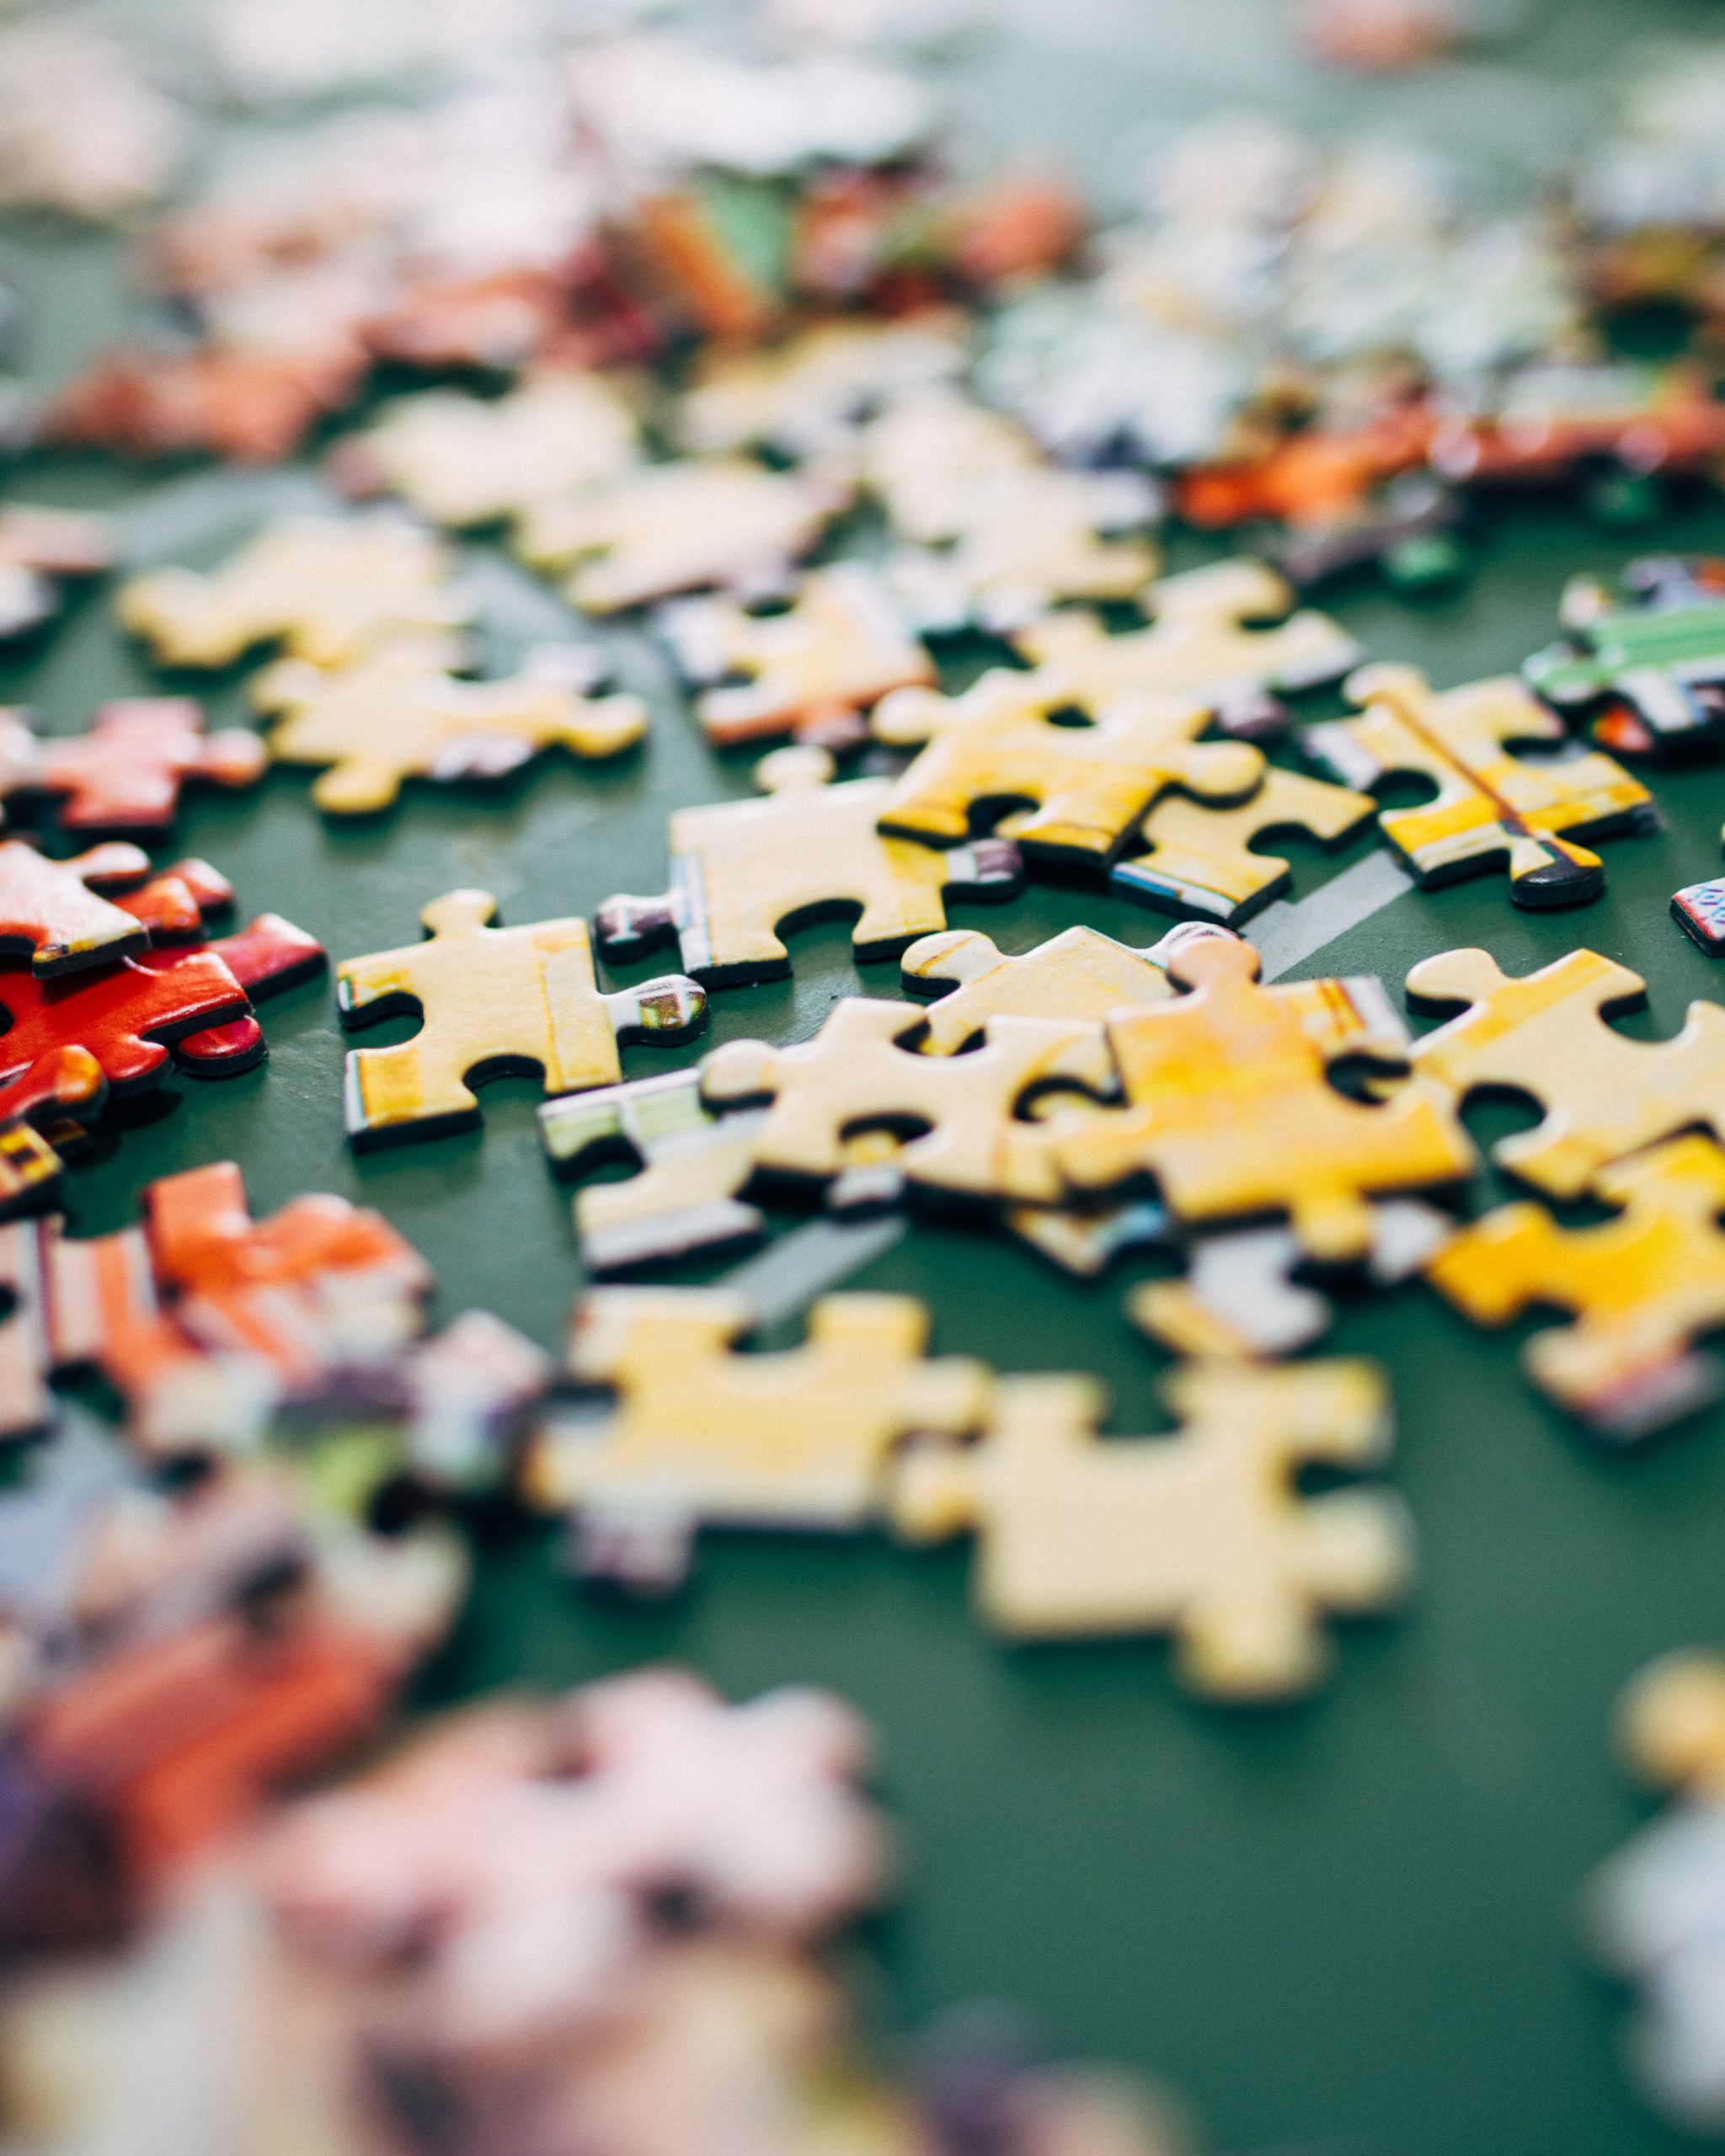 Calling all Puzzle Lovers – Scotland County Memorial Library